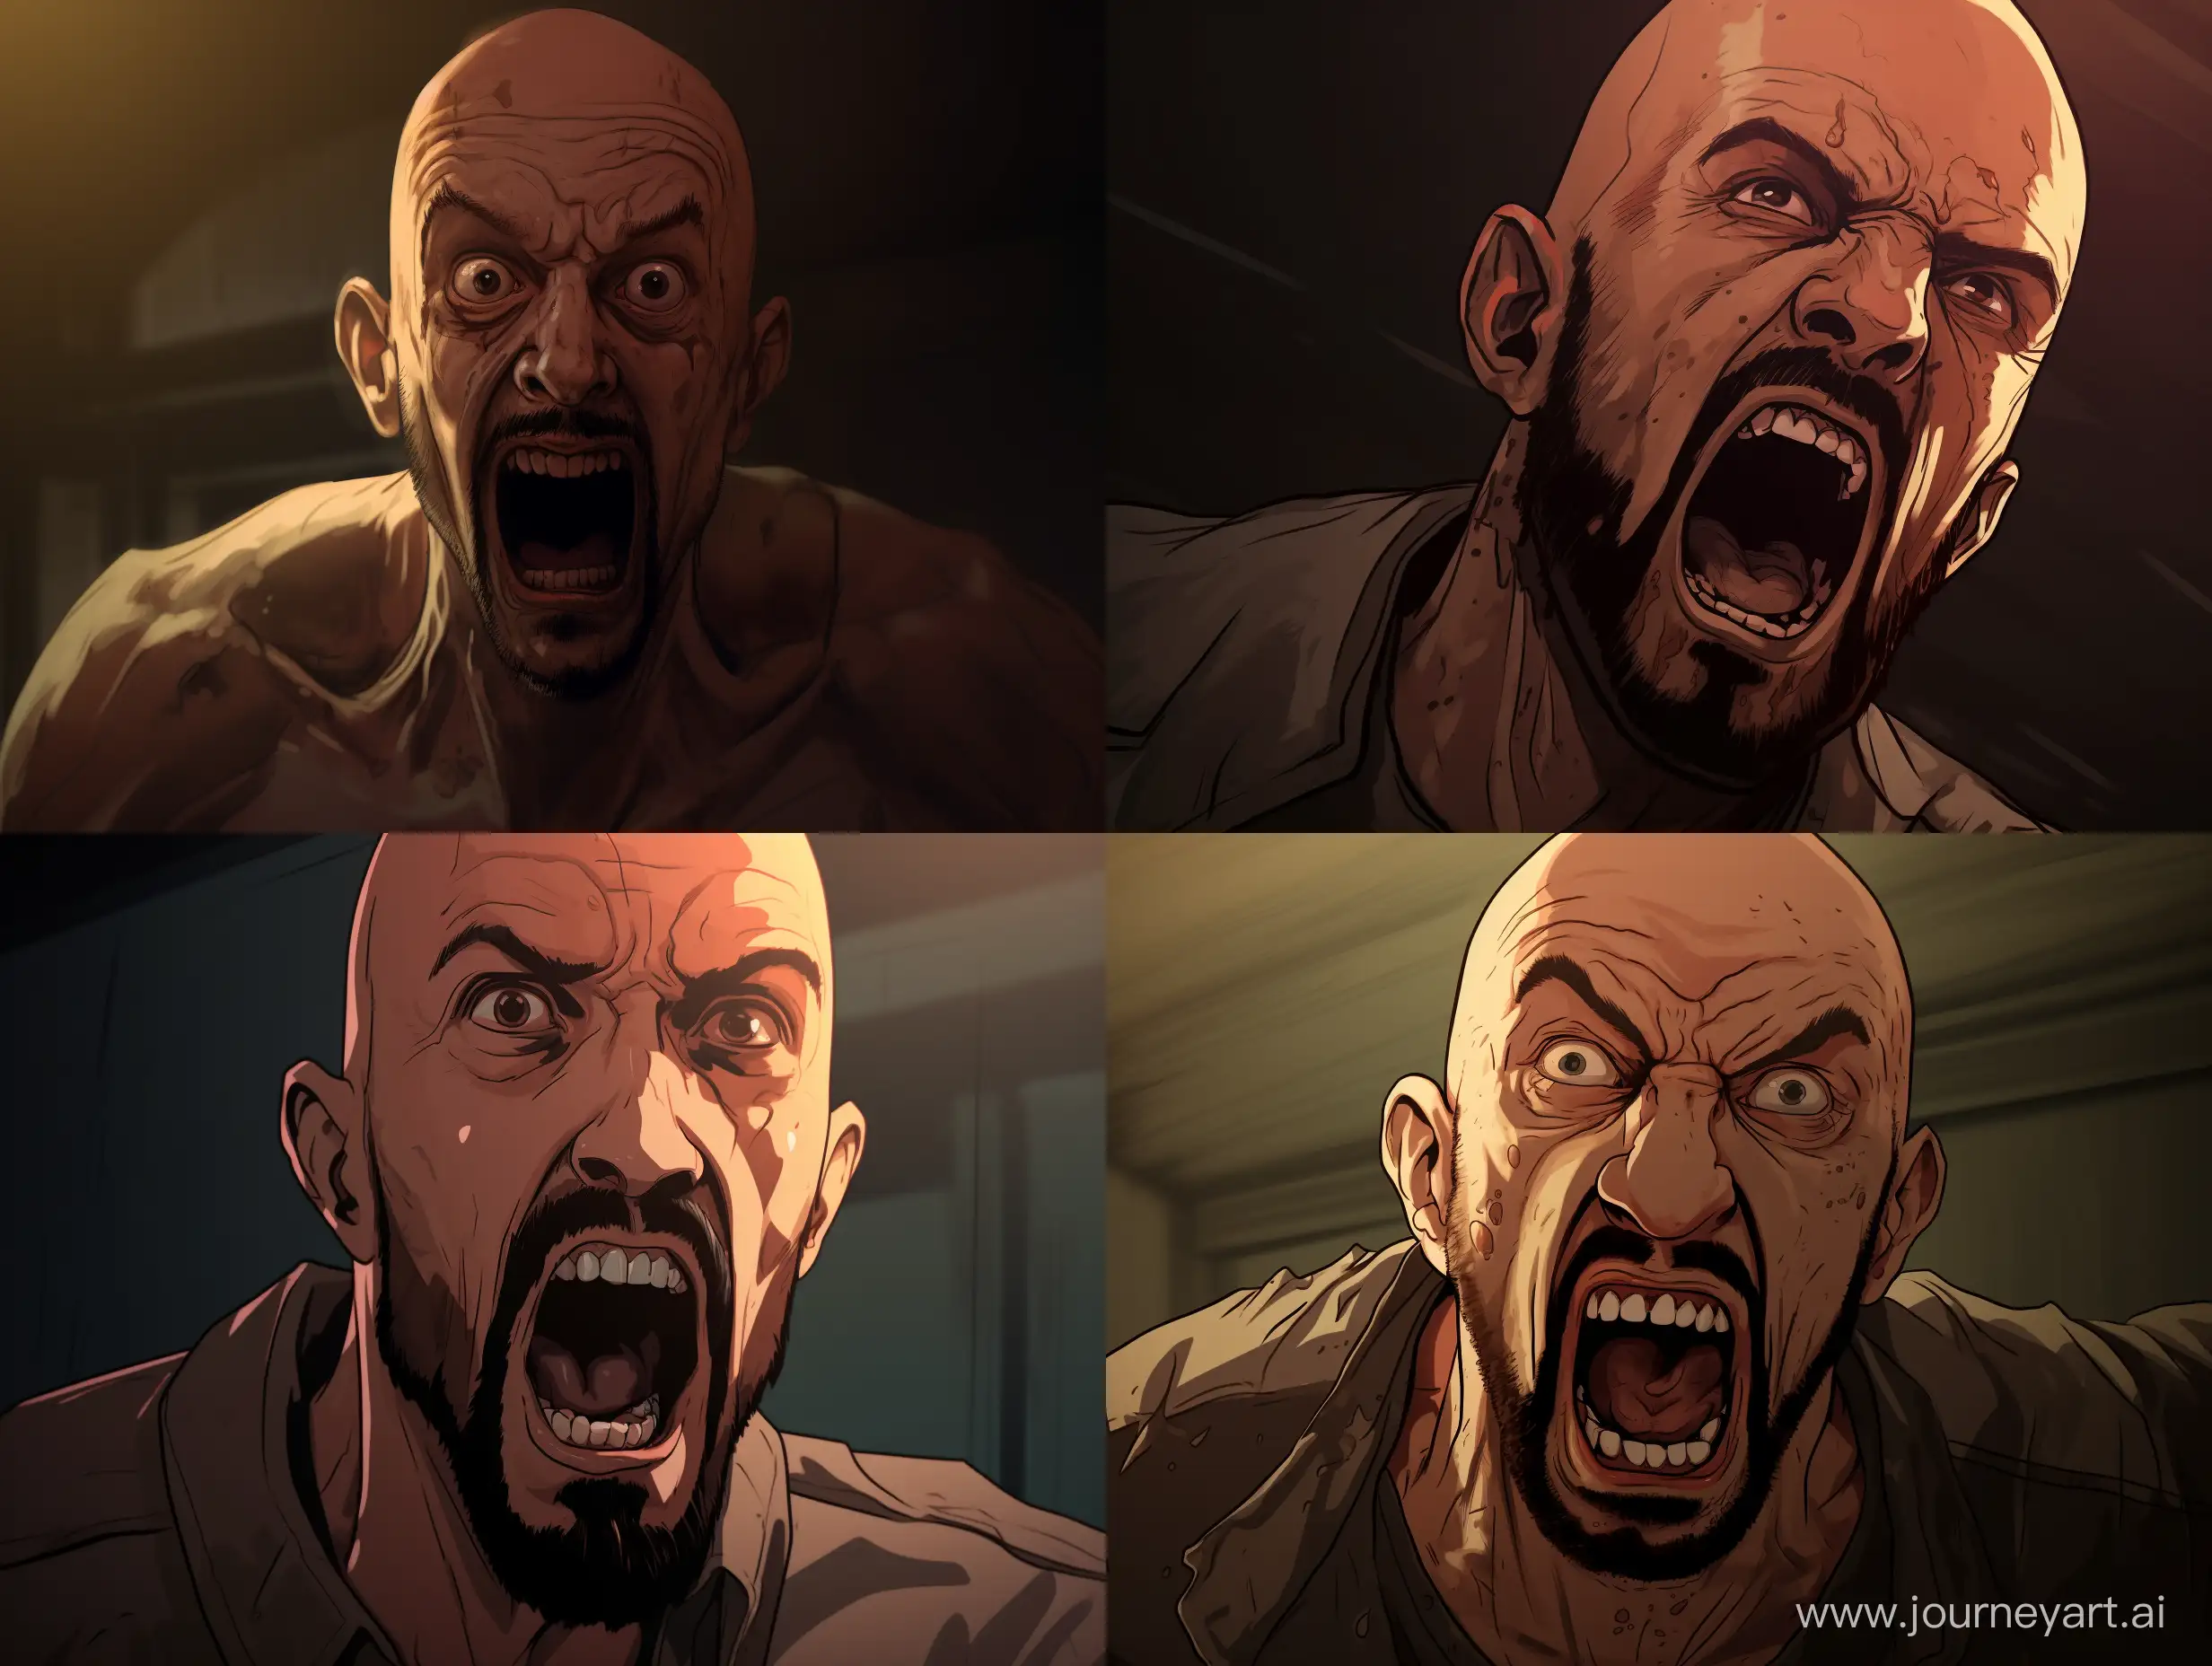 A man with shaved hair and a short, neatly trimmed beard, his face contorted in sheer terror. He stands in a dimly lit room, his eyes wide and darting around frantically, as if he sees something unspeakable lurking in the shadows. His lips are pressed together in a tight line, his teeth clenched against the unbearable fear that grips him. The horror game theme is evident throughout the room, with decrepit furniture and eerie, flickering lights casting strange shadows across the walls. The man is dressed in casual clothing, his once-comfortable attire now feeling tight and restrictive as he tries to flee from whatever sinister force is pursuing him. His surroundings hint at a recent struggle; overturned furniture and scattered personal effects litter the floor, adding to the sense of panic and disorientation. The image captures the man at a moment of intense fear, as he realizes that he is trapped in a nightmarish world where escape seems nearly impossible.